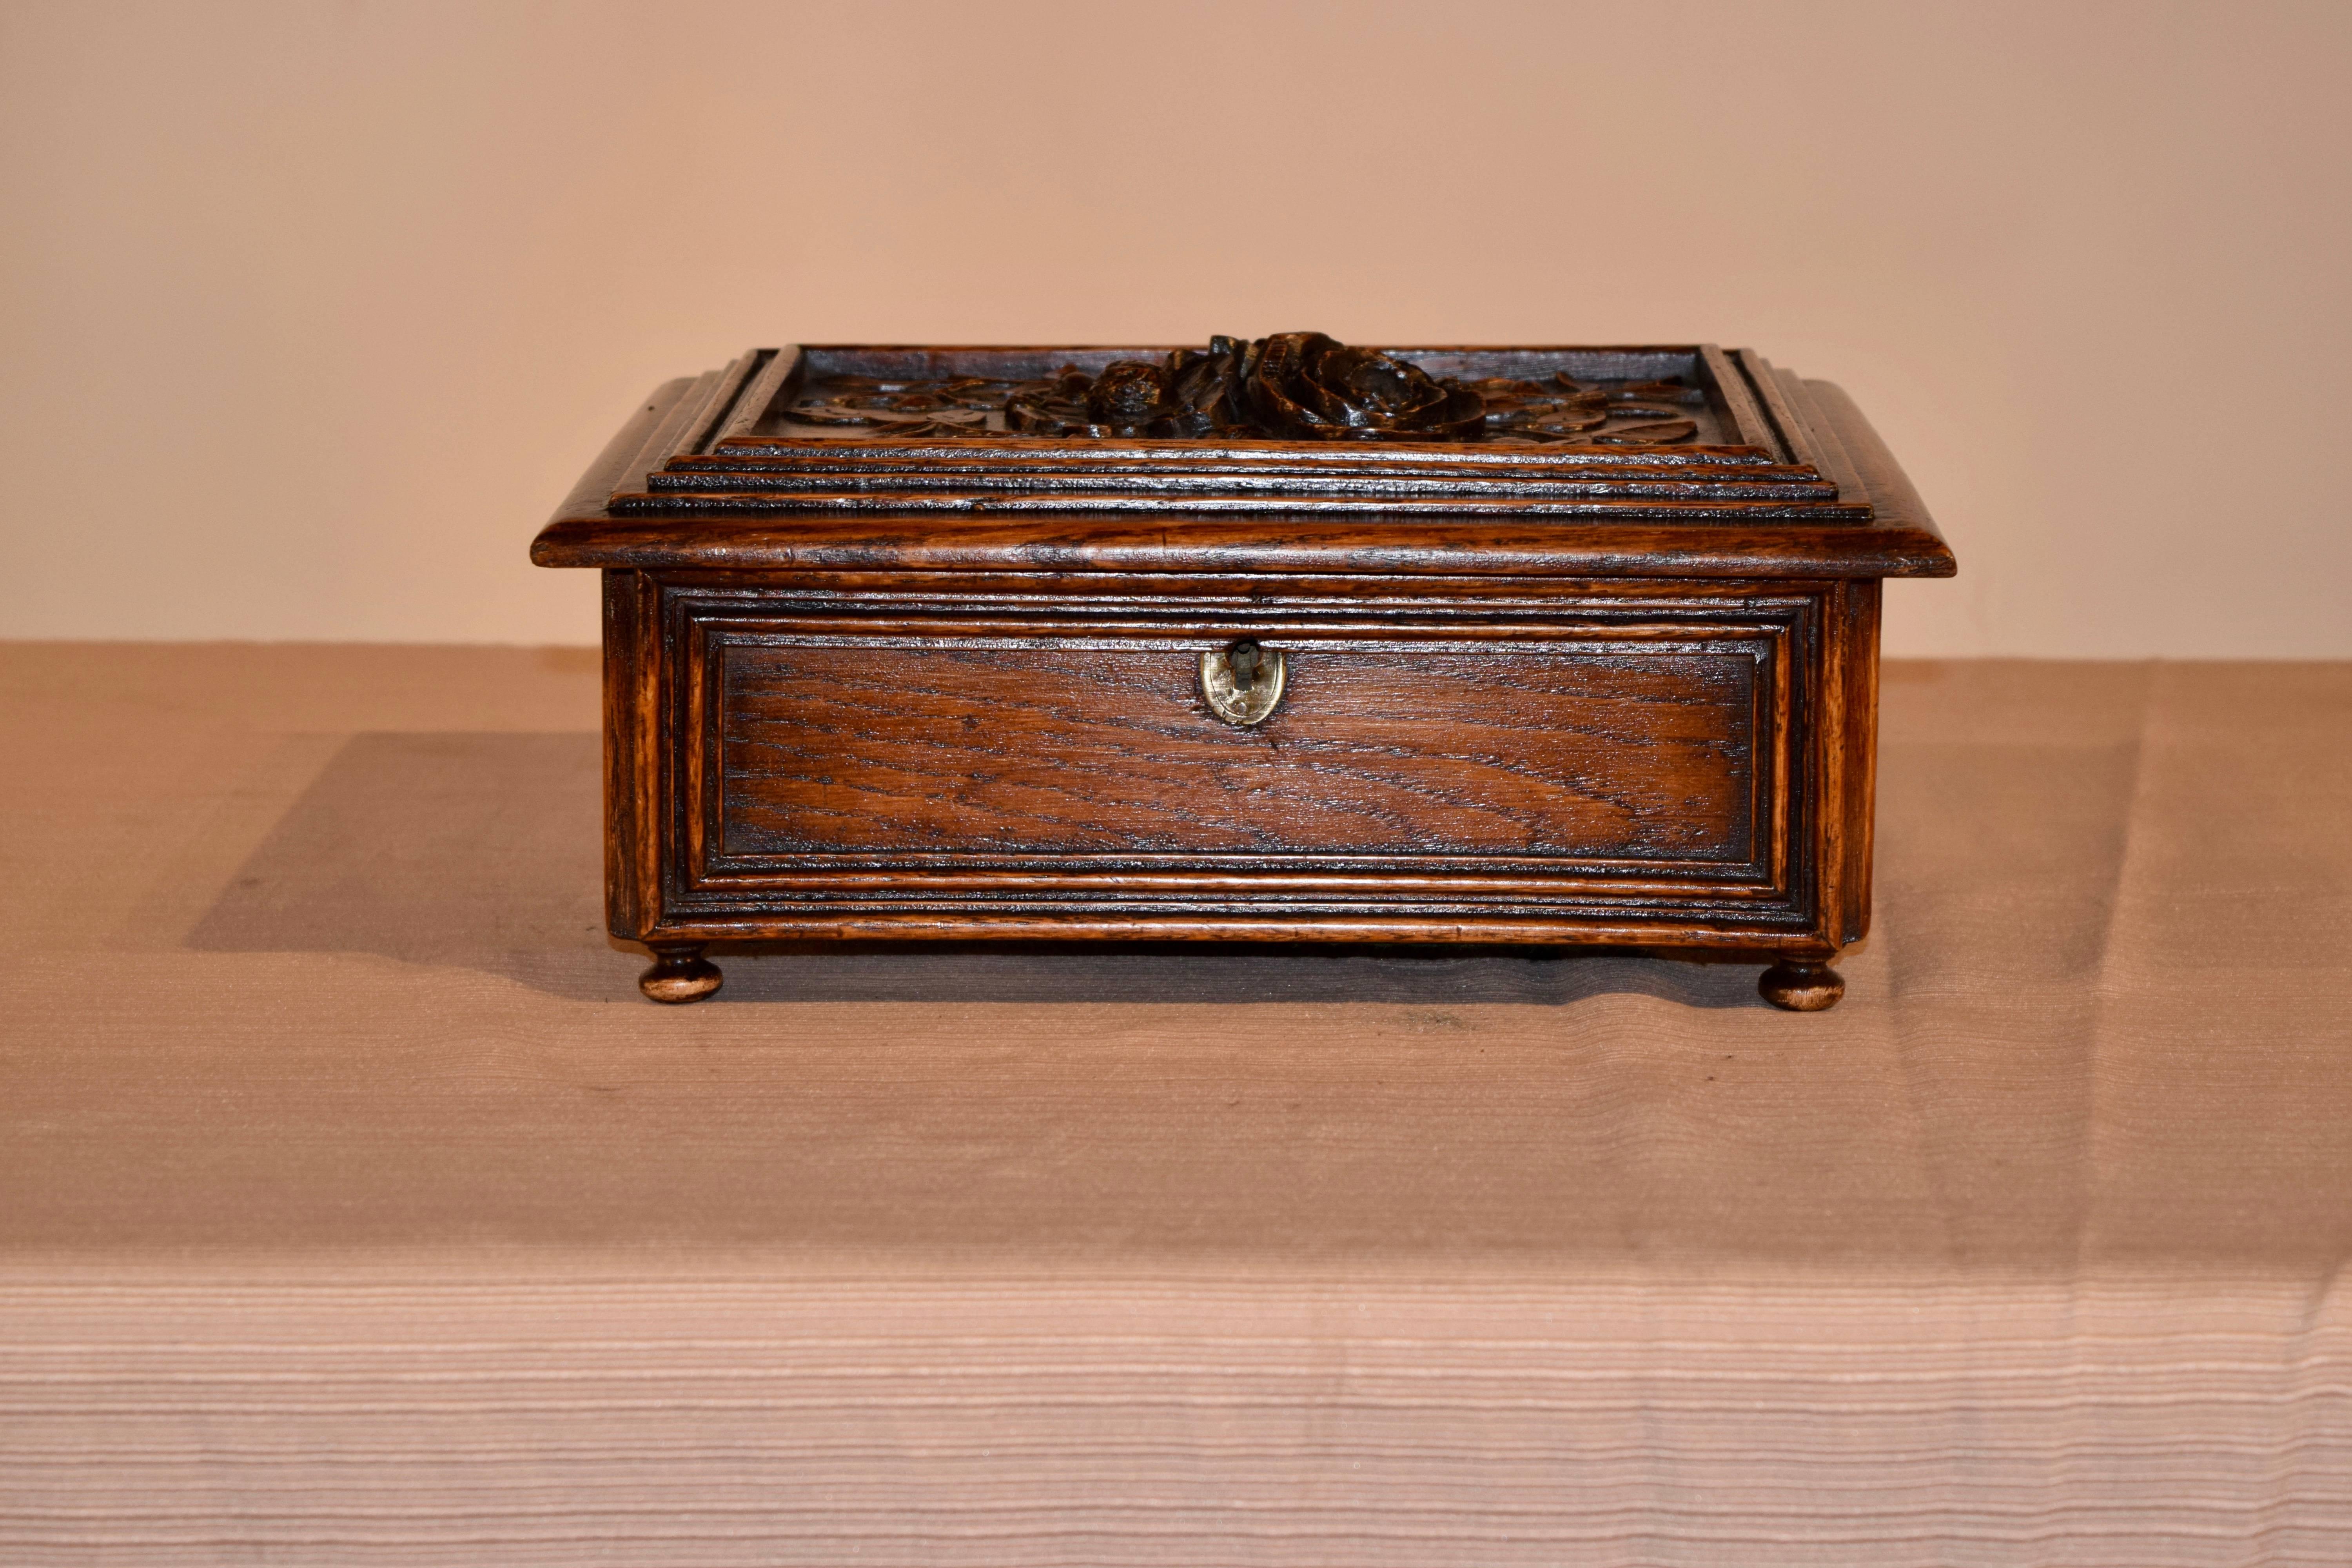 19th century French dresser box with exquisite carving. The top is framed with a molded border and surrounds a central area with hand-carved flowers and leaves. The sides are also bordered with lovely molded edges, and the box is supported on hand